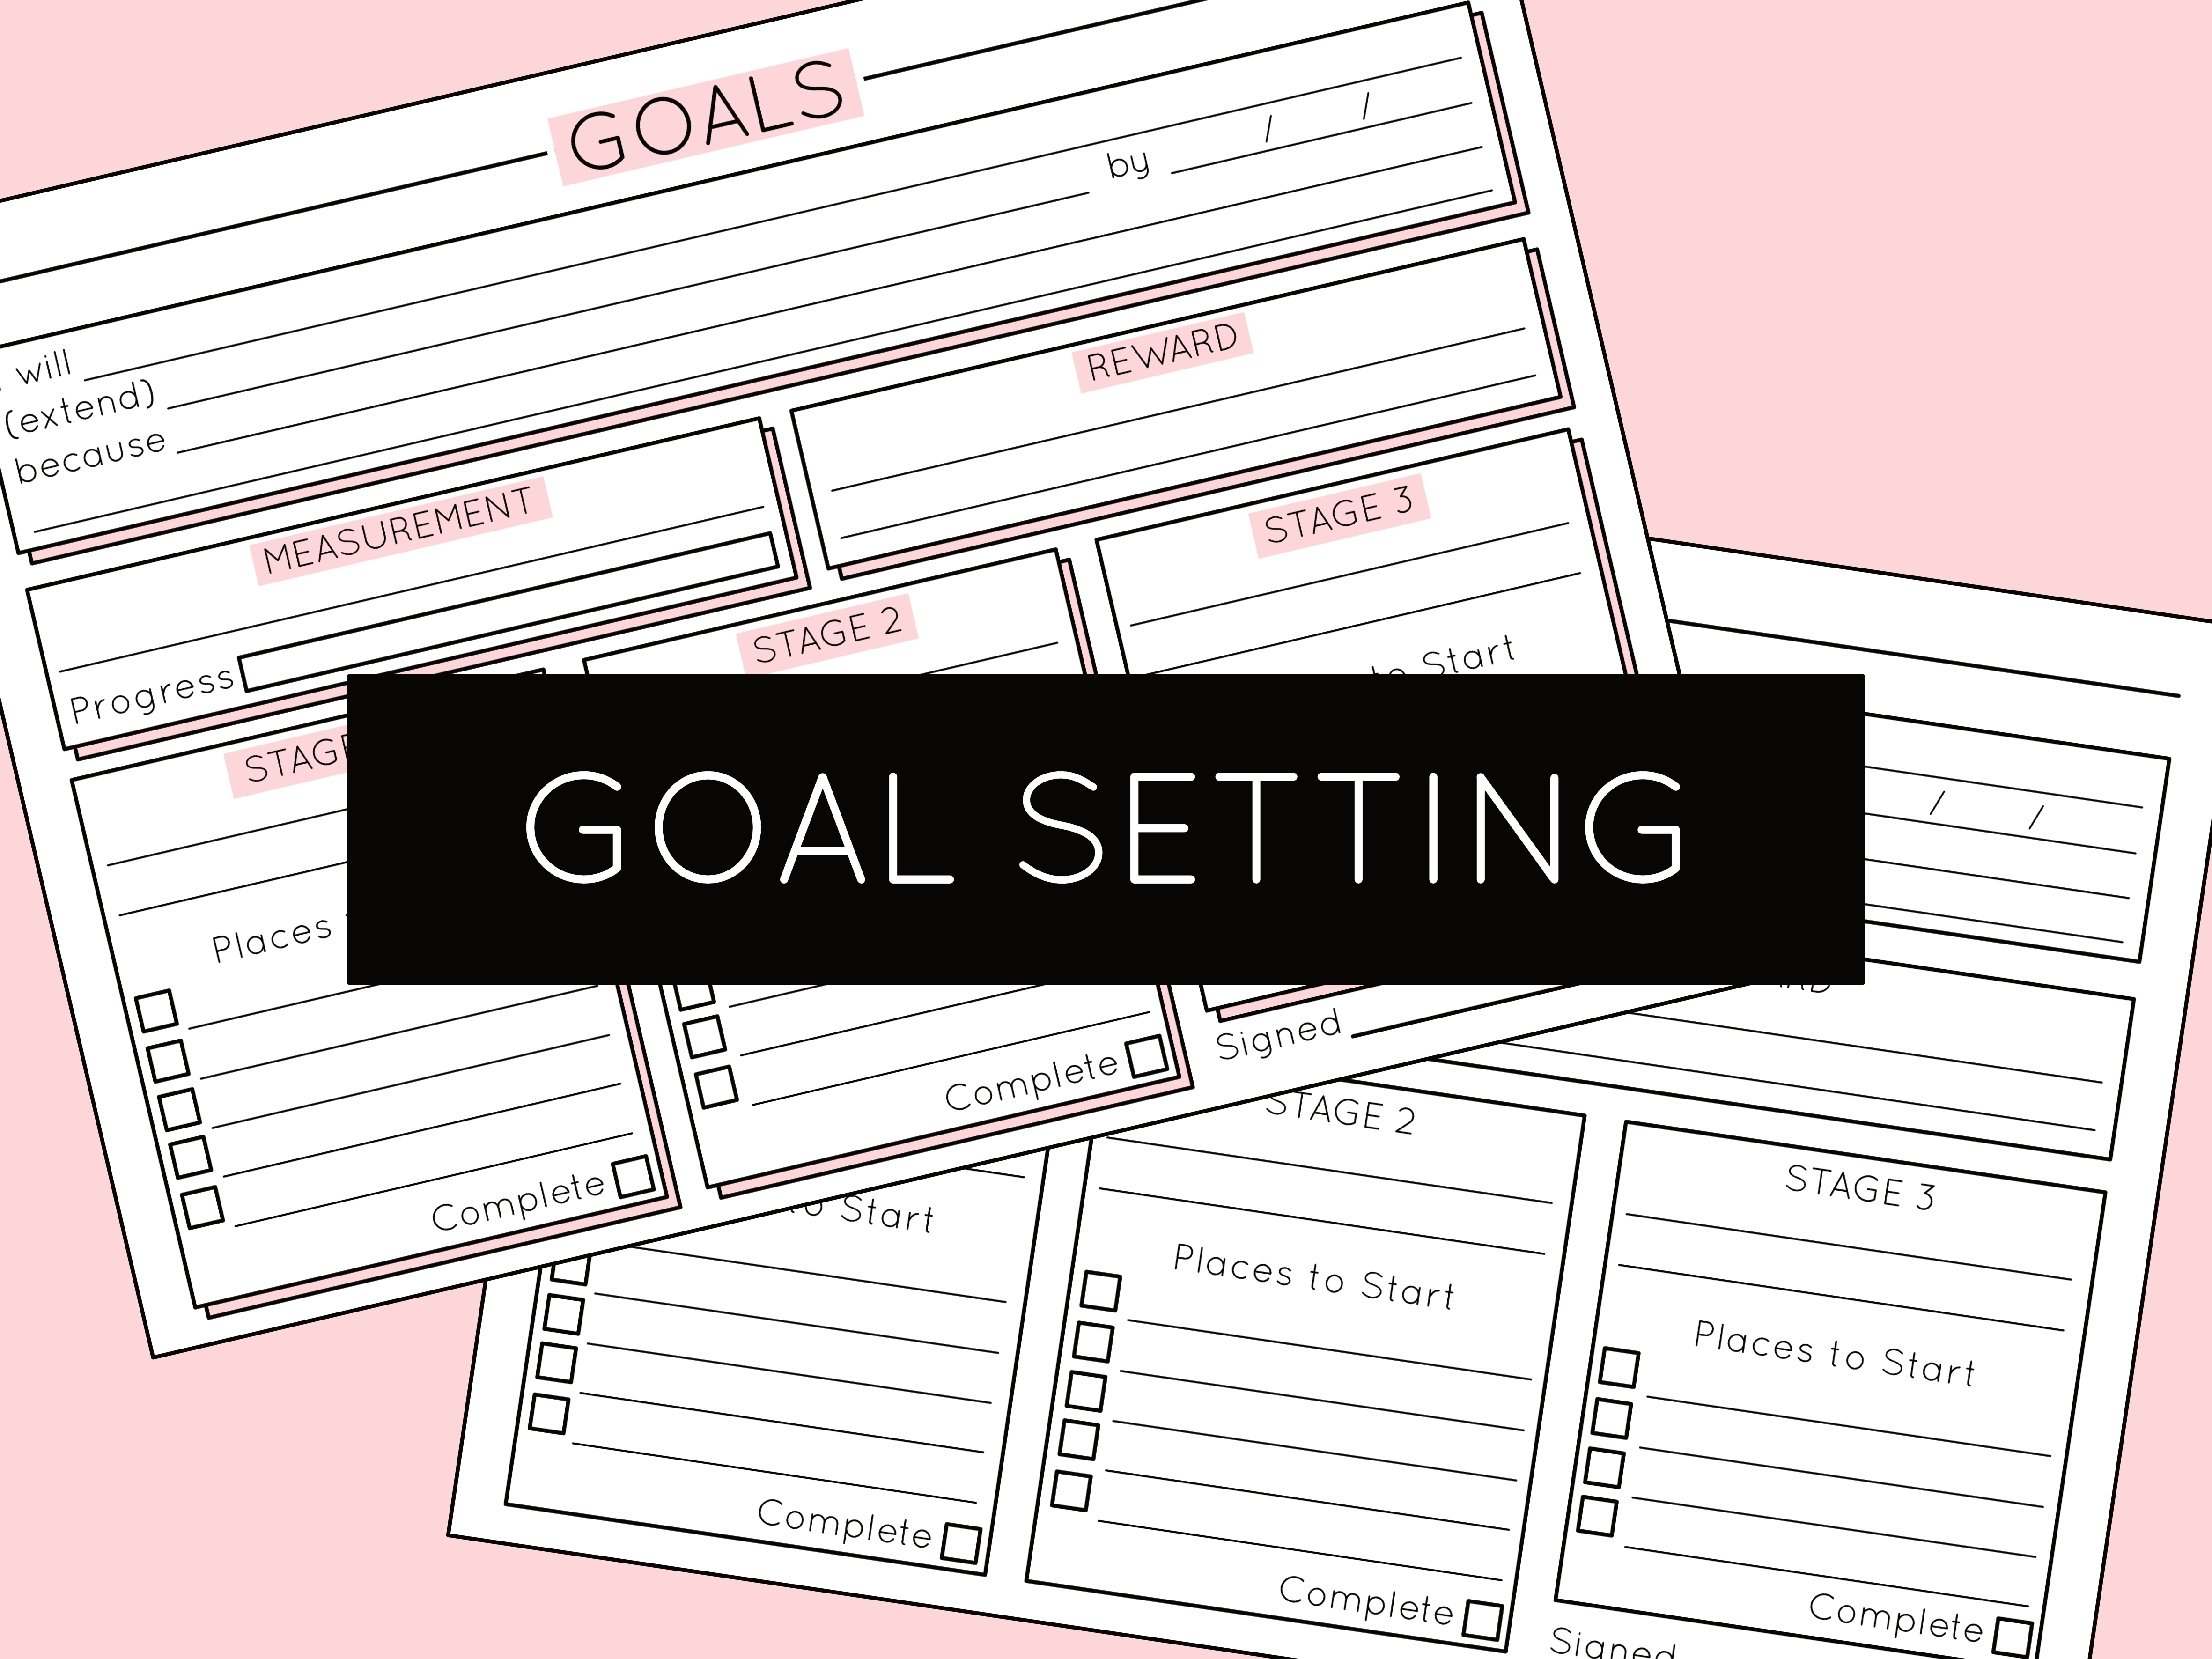 Top 5 tips for setting goals